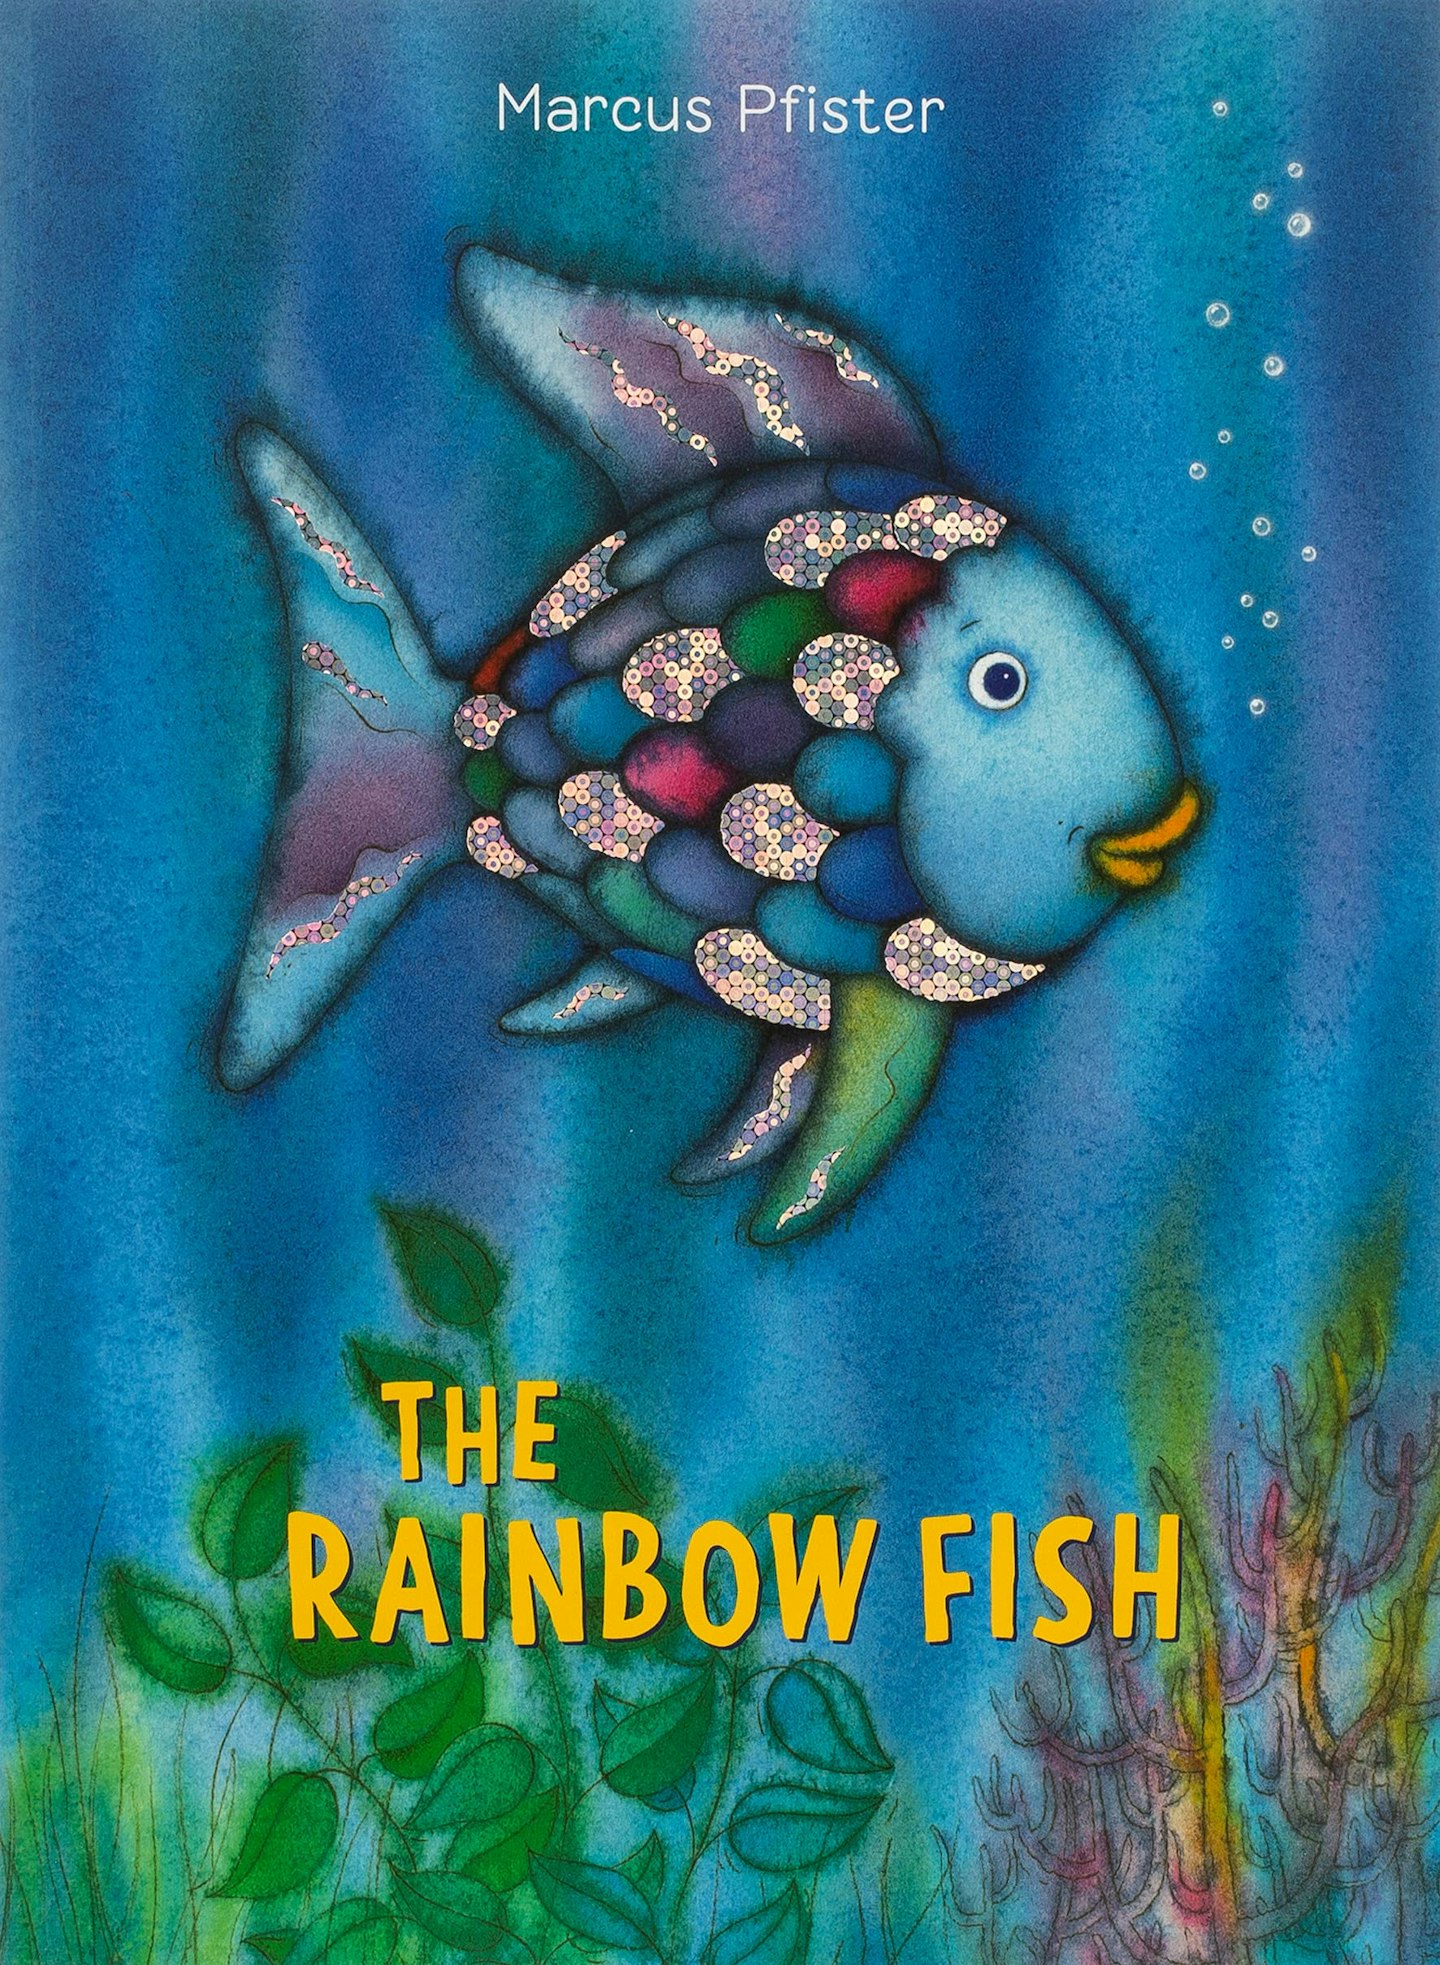 Children's books from the 90s